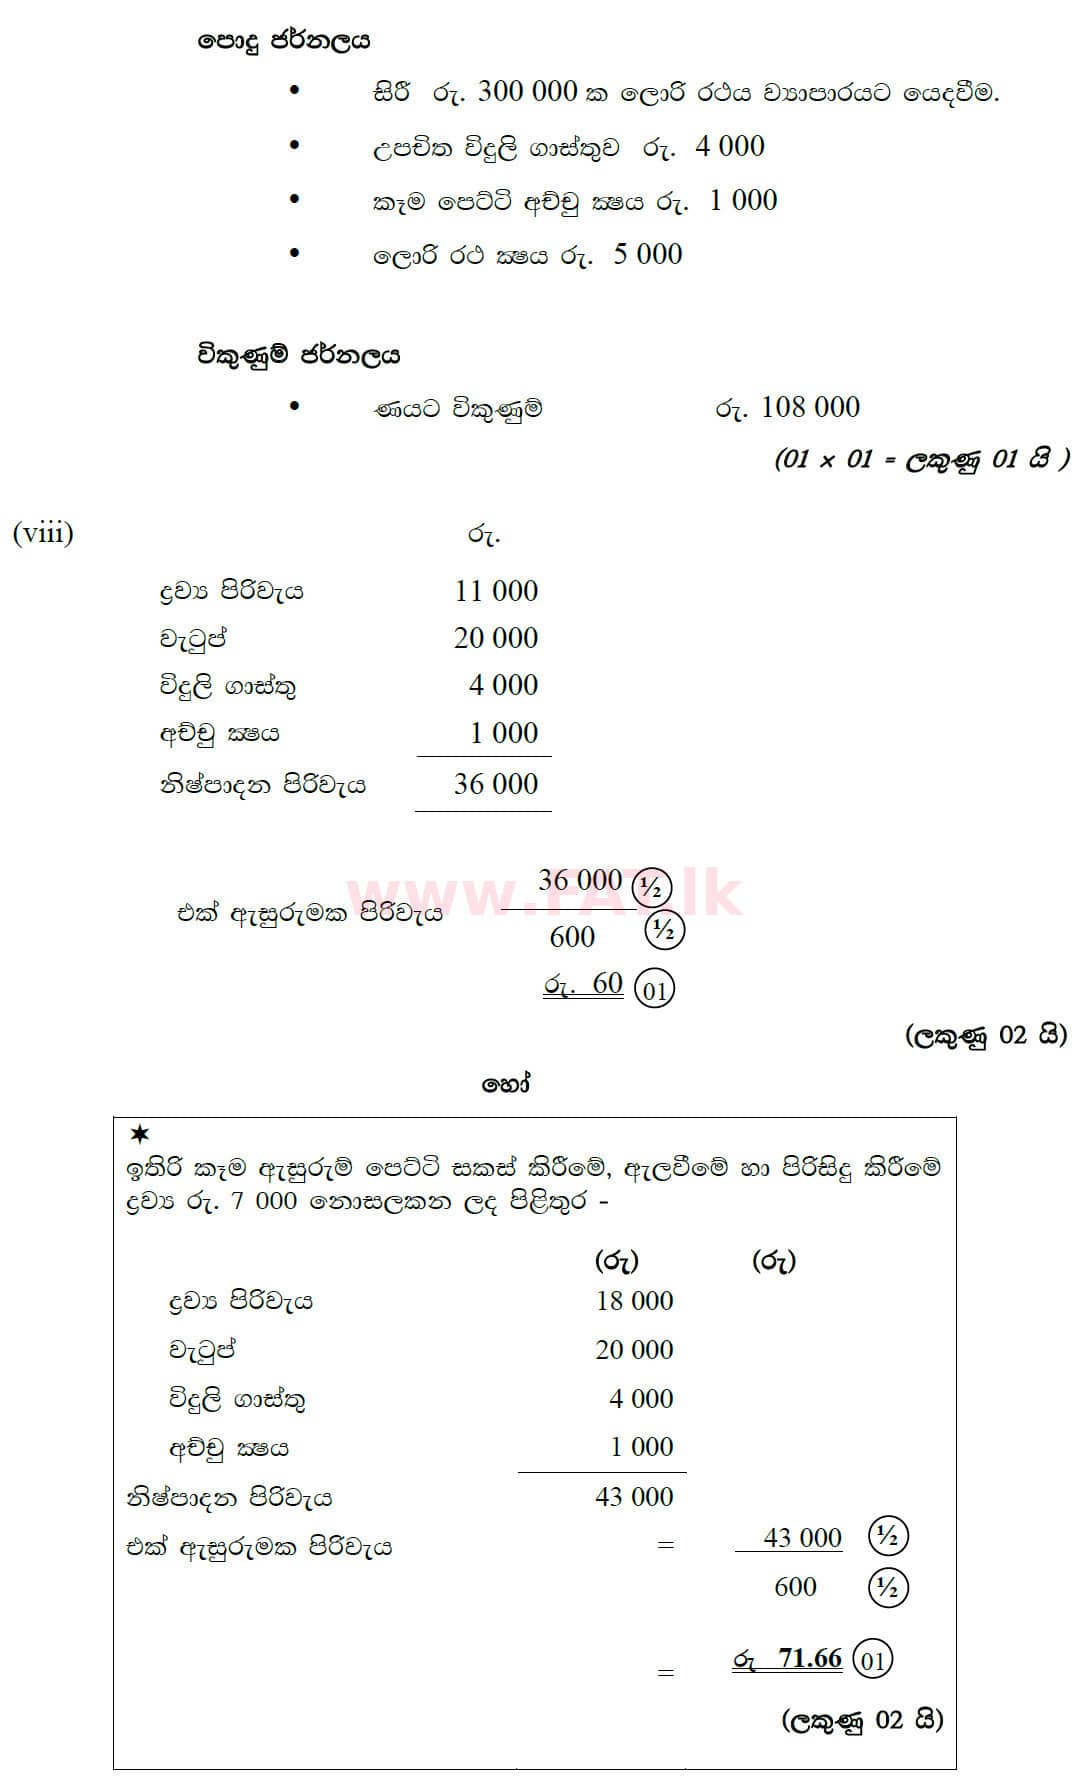 National Syllabus : Ordinary Level (O/L) Business and Accounting Studies - 2020 March - Paper II (සිංහල Medium) 1 5758